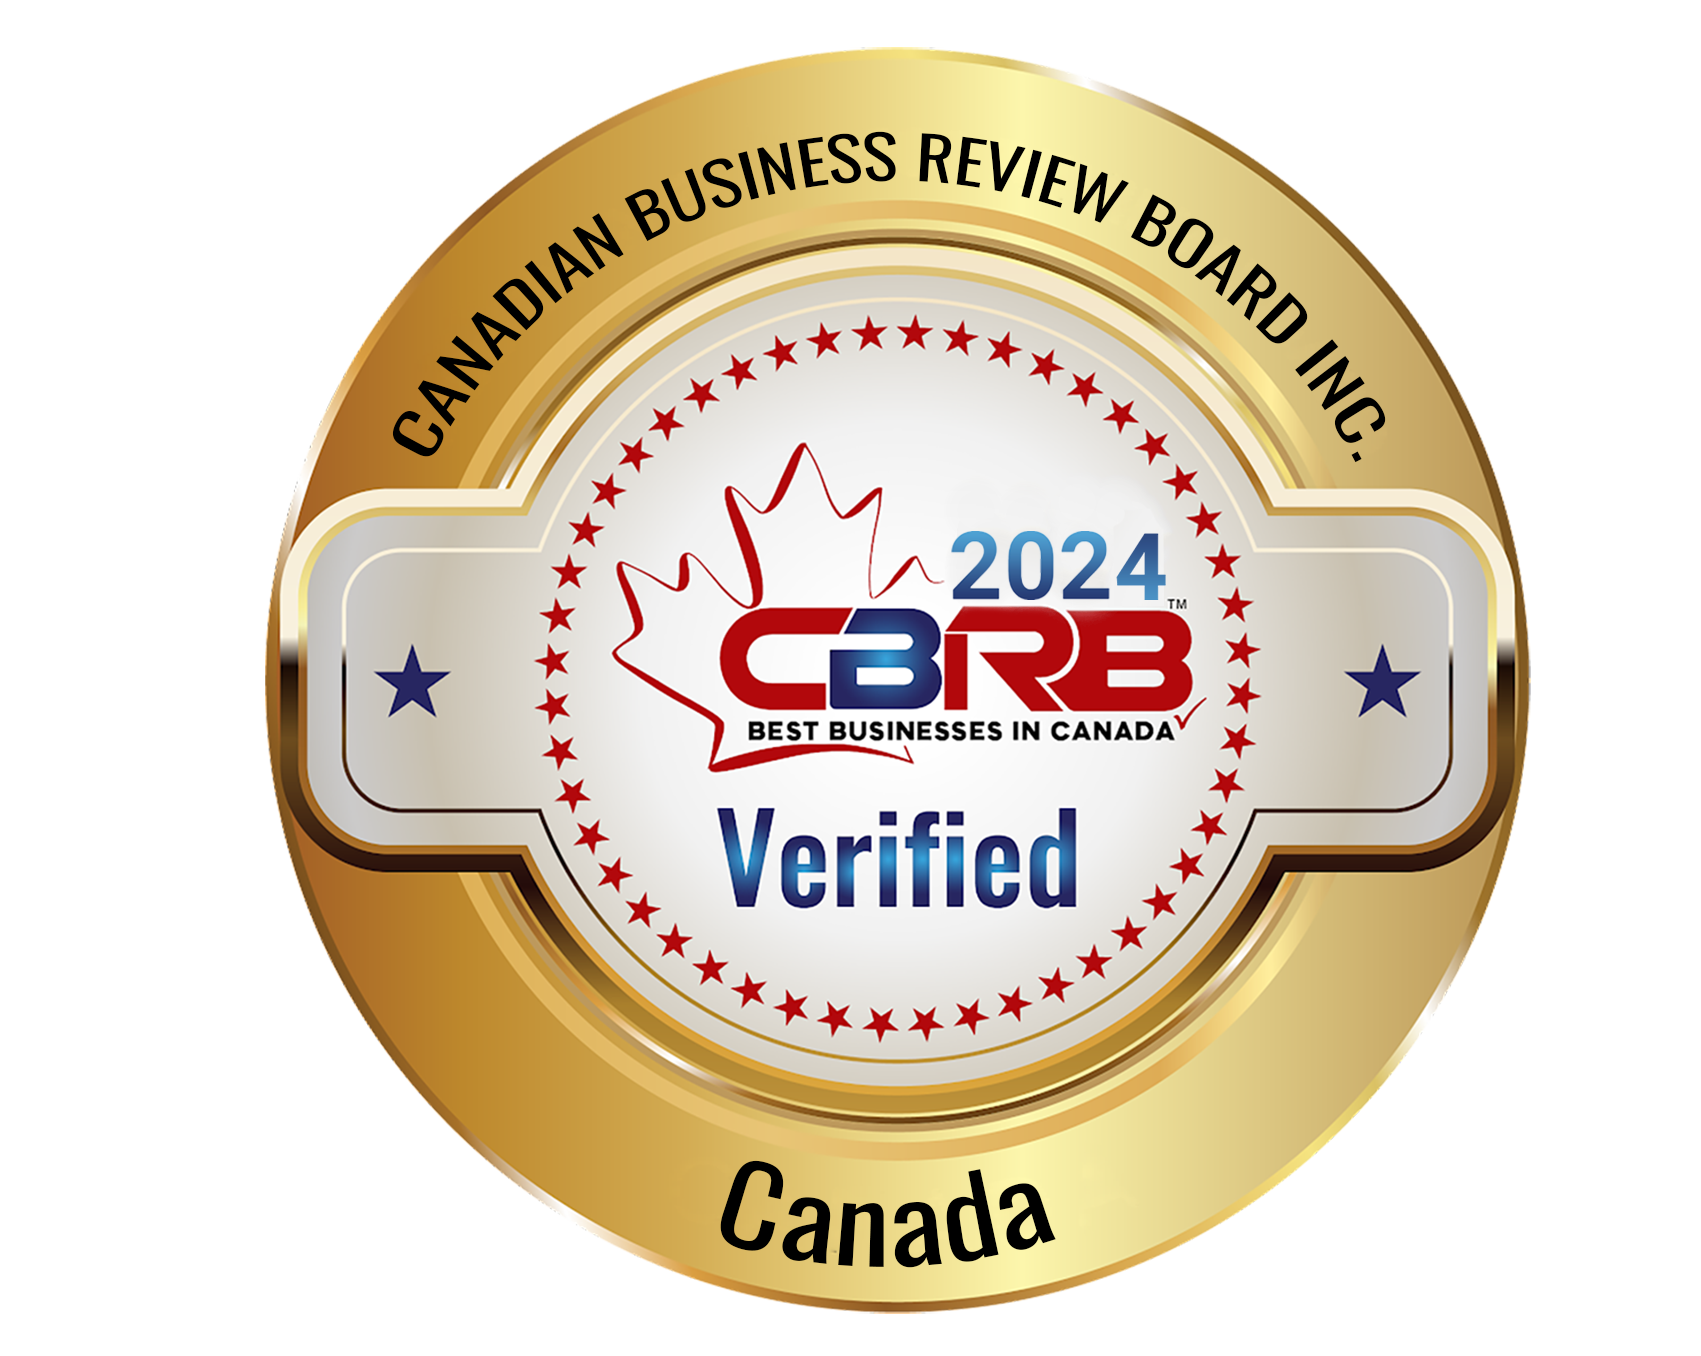 Canadian Business Review Board